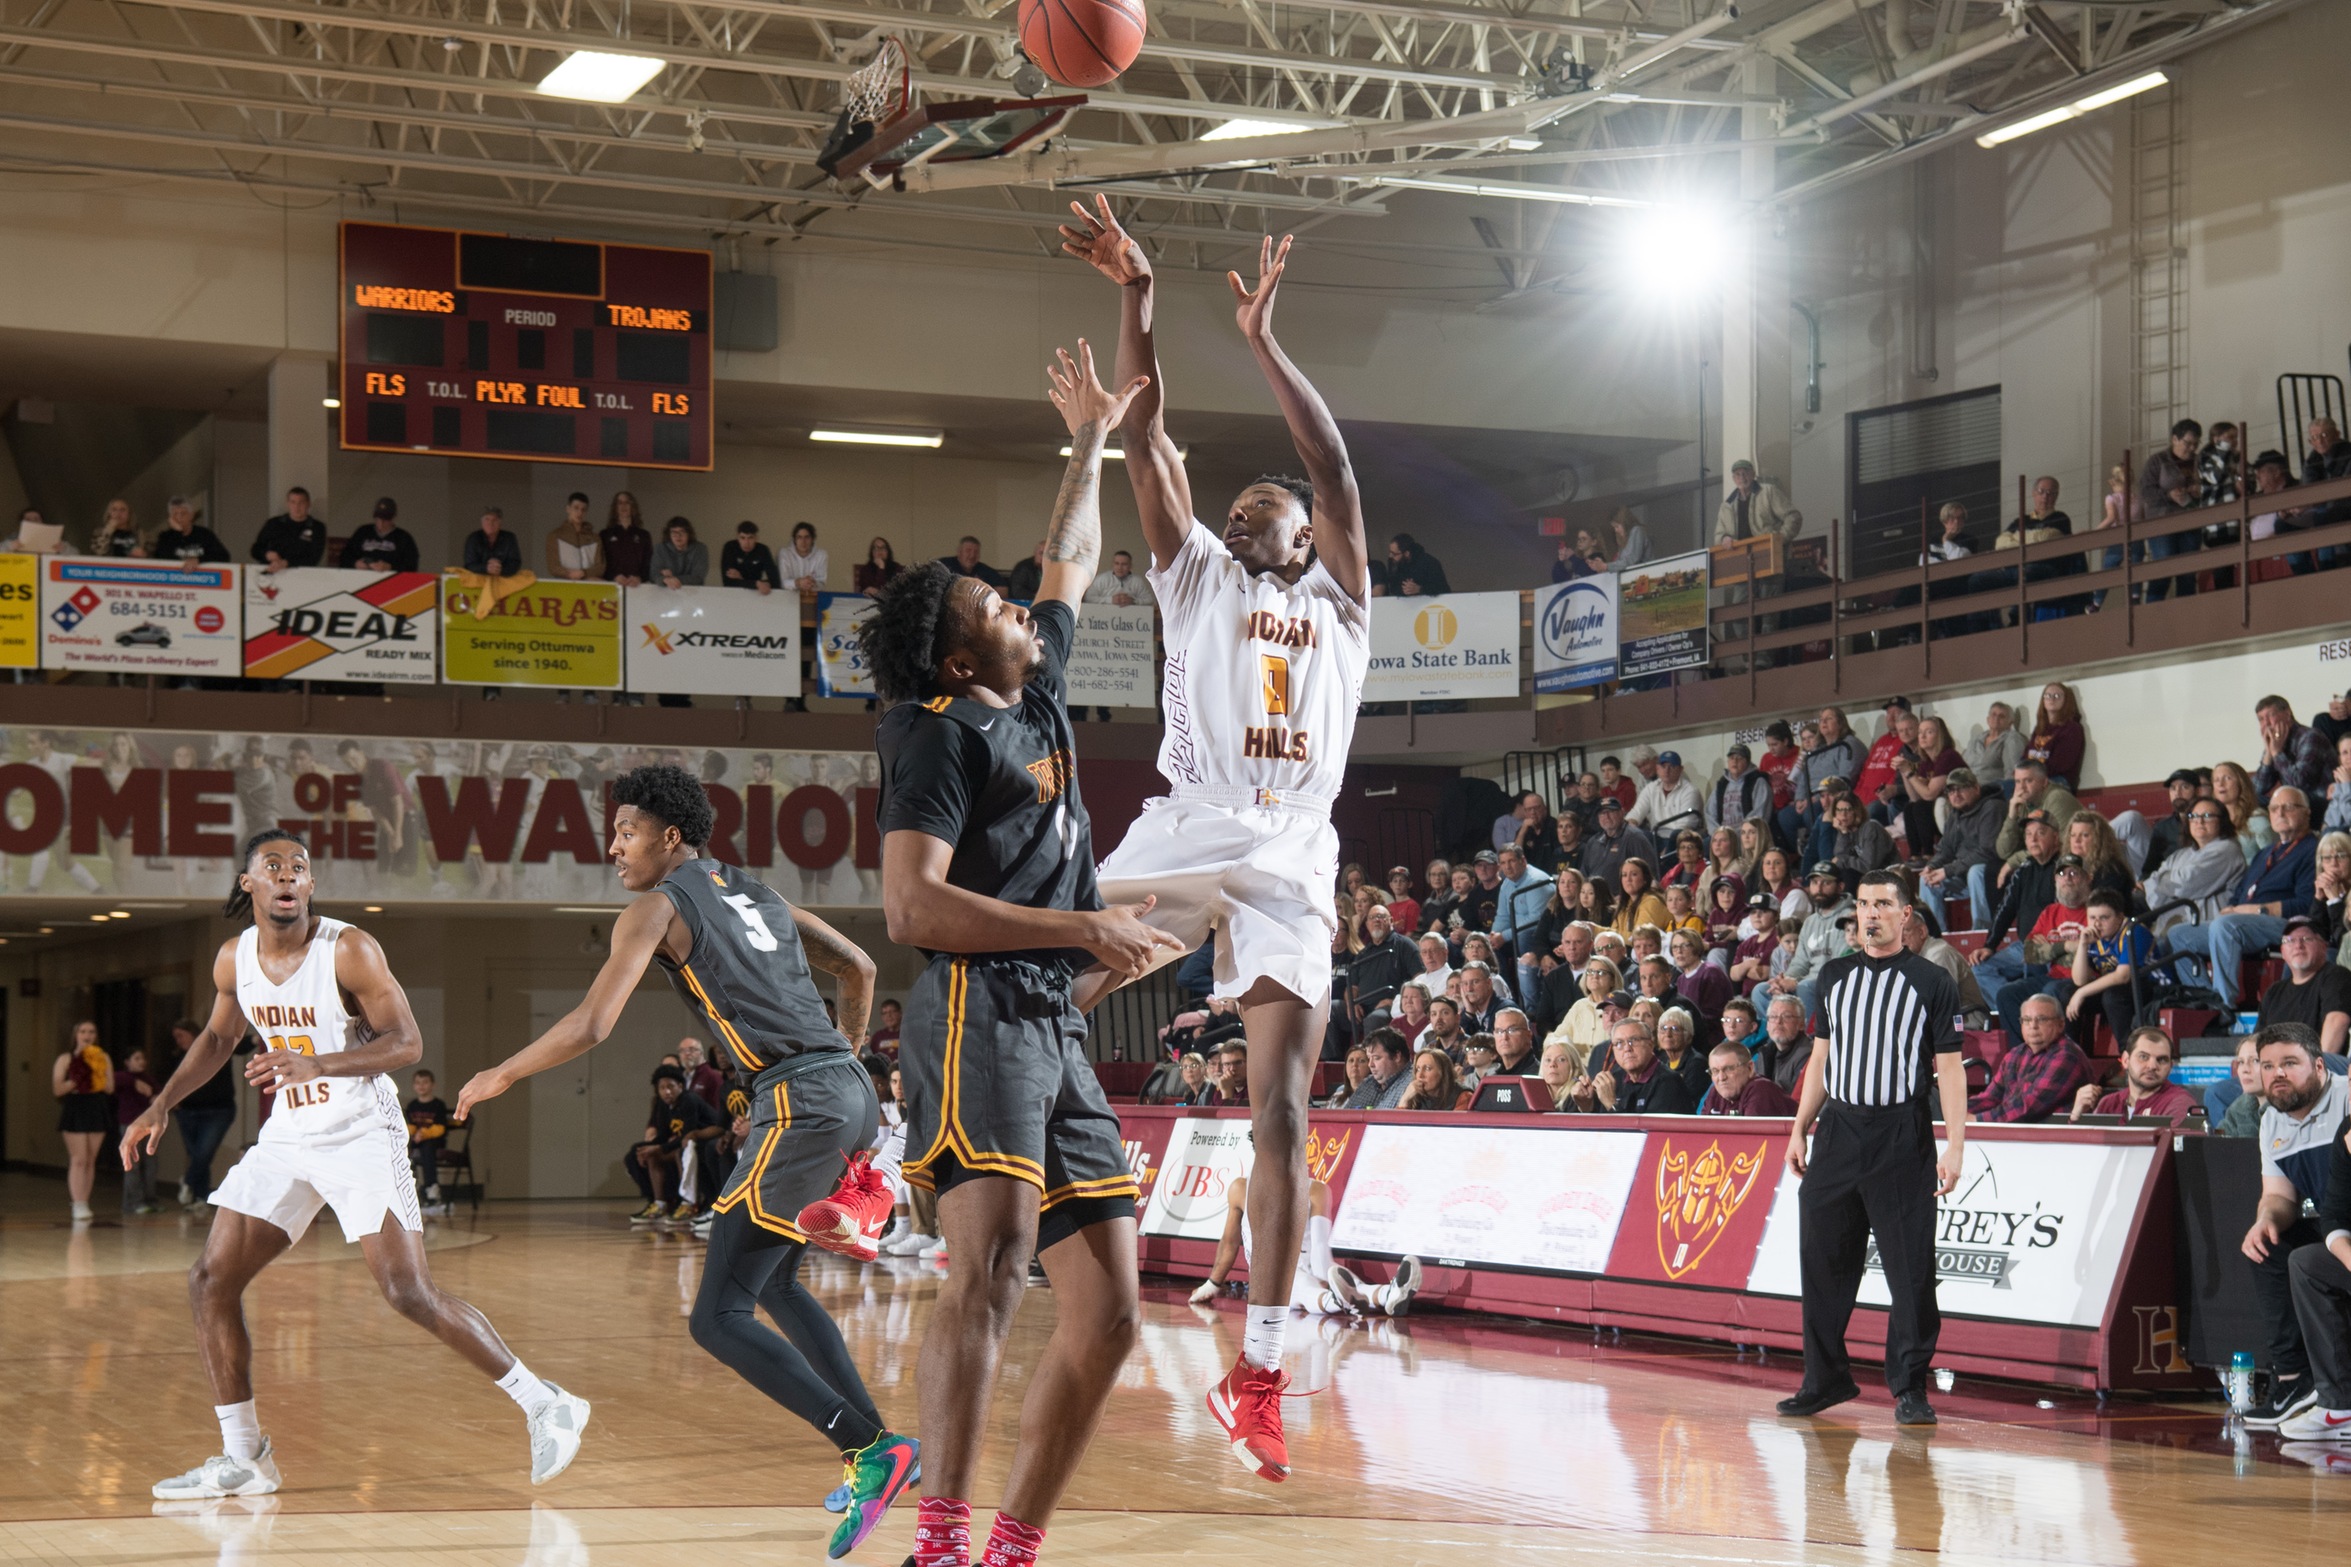 WARRIORS UP TO NO. 5 IN NATIONAL POLL